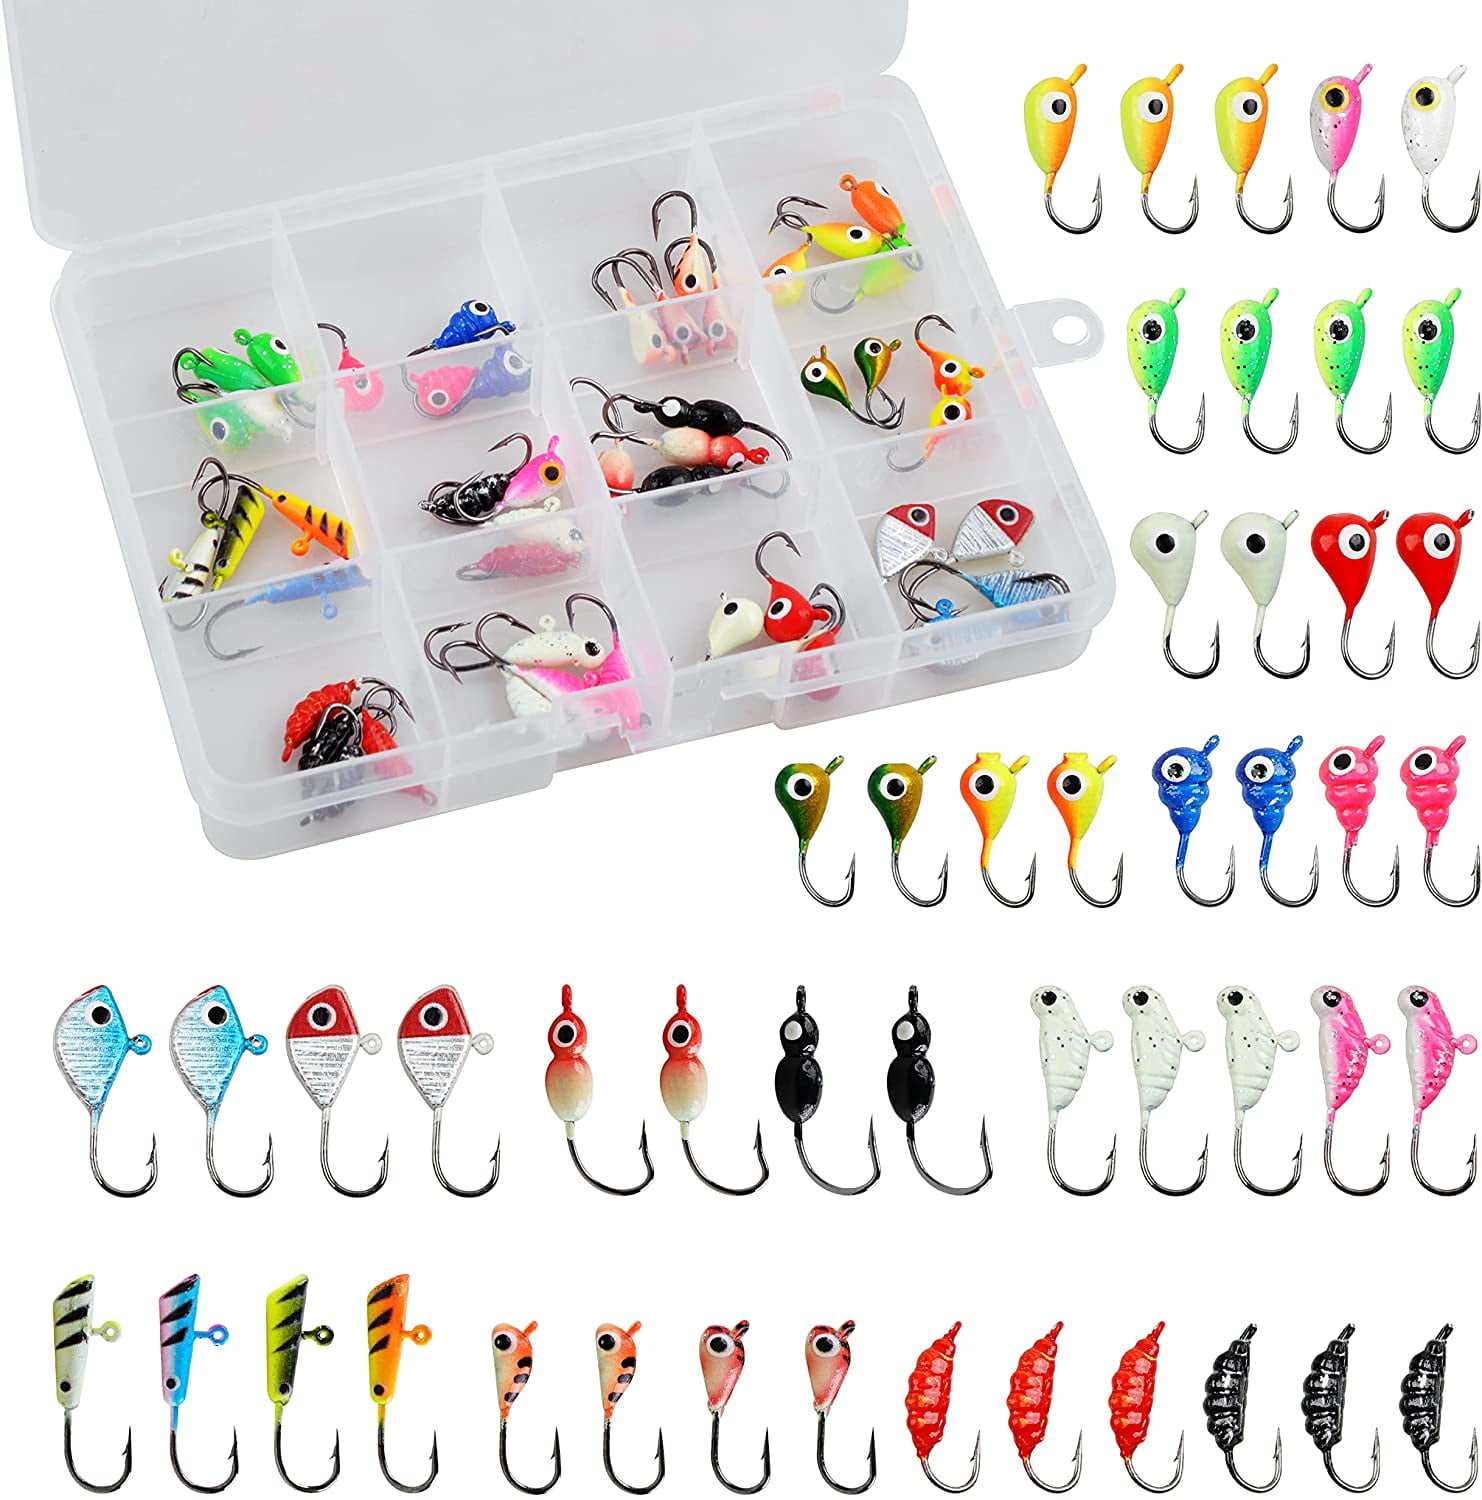 Ice Fishing Jigs Lure 4pcs Treble Hooks Jig Head Weghited Metal Lures  Spinner Blade Winter Ice Fishing Lures for Panfish Crappie Perch Pike Bluegill  Sunfish, Jigs -  Canada